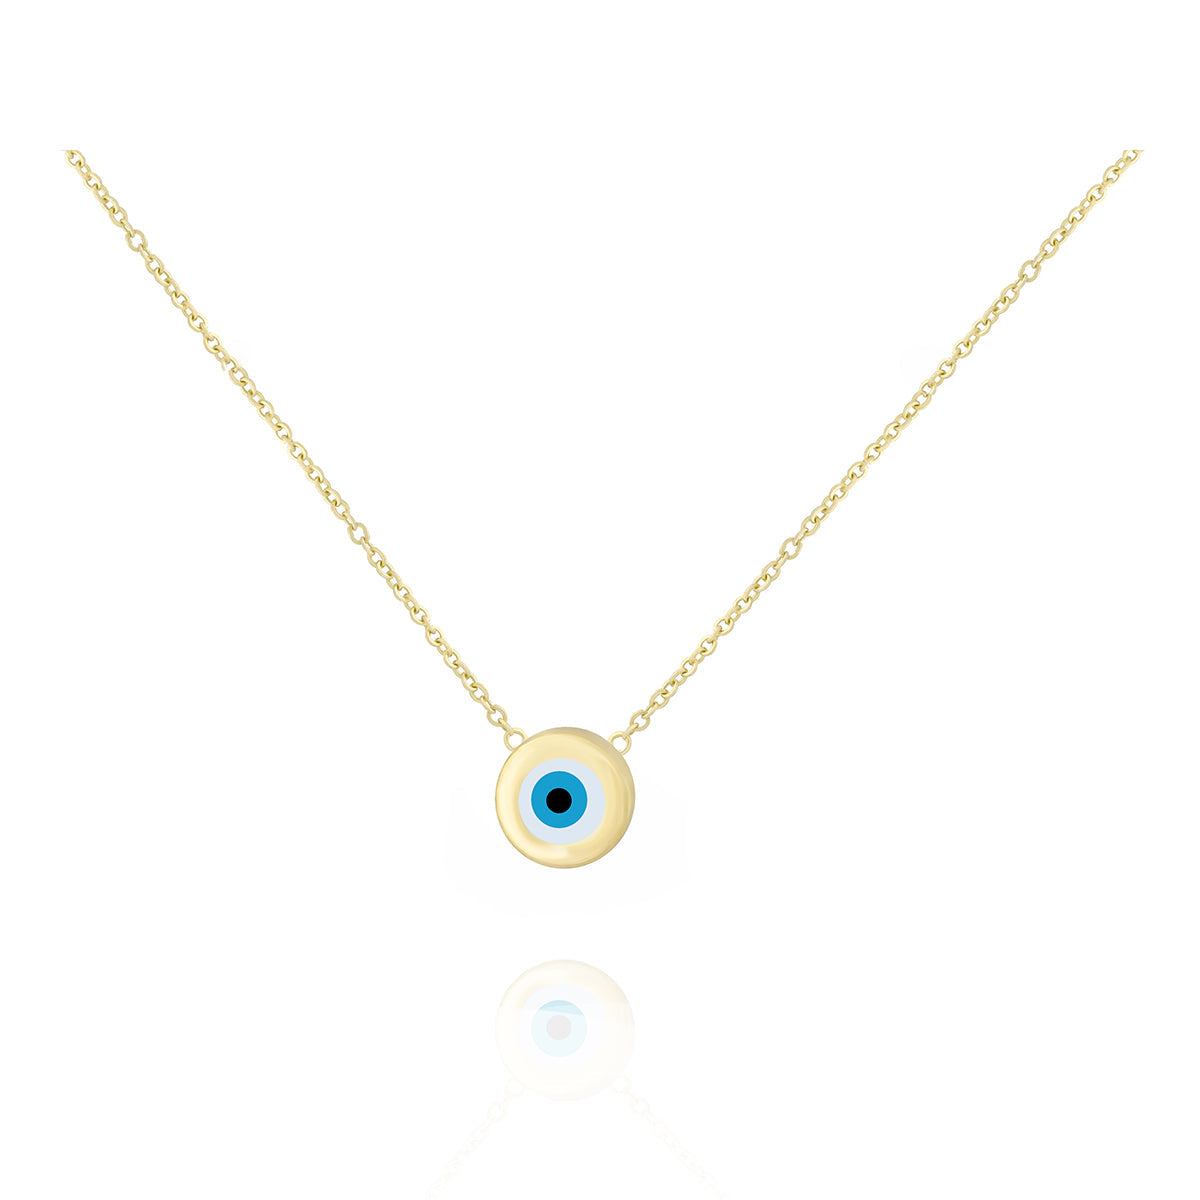 Evil Eye Pendant Necklace in 18k Yellow Gold